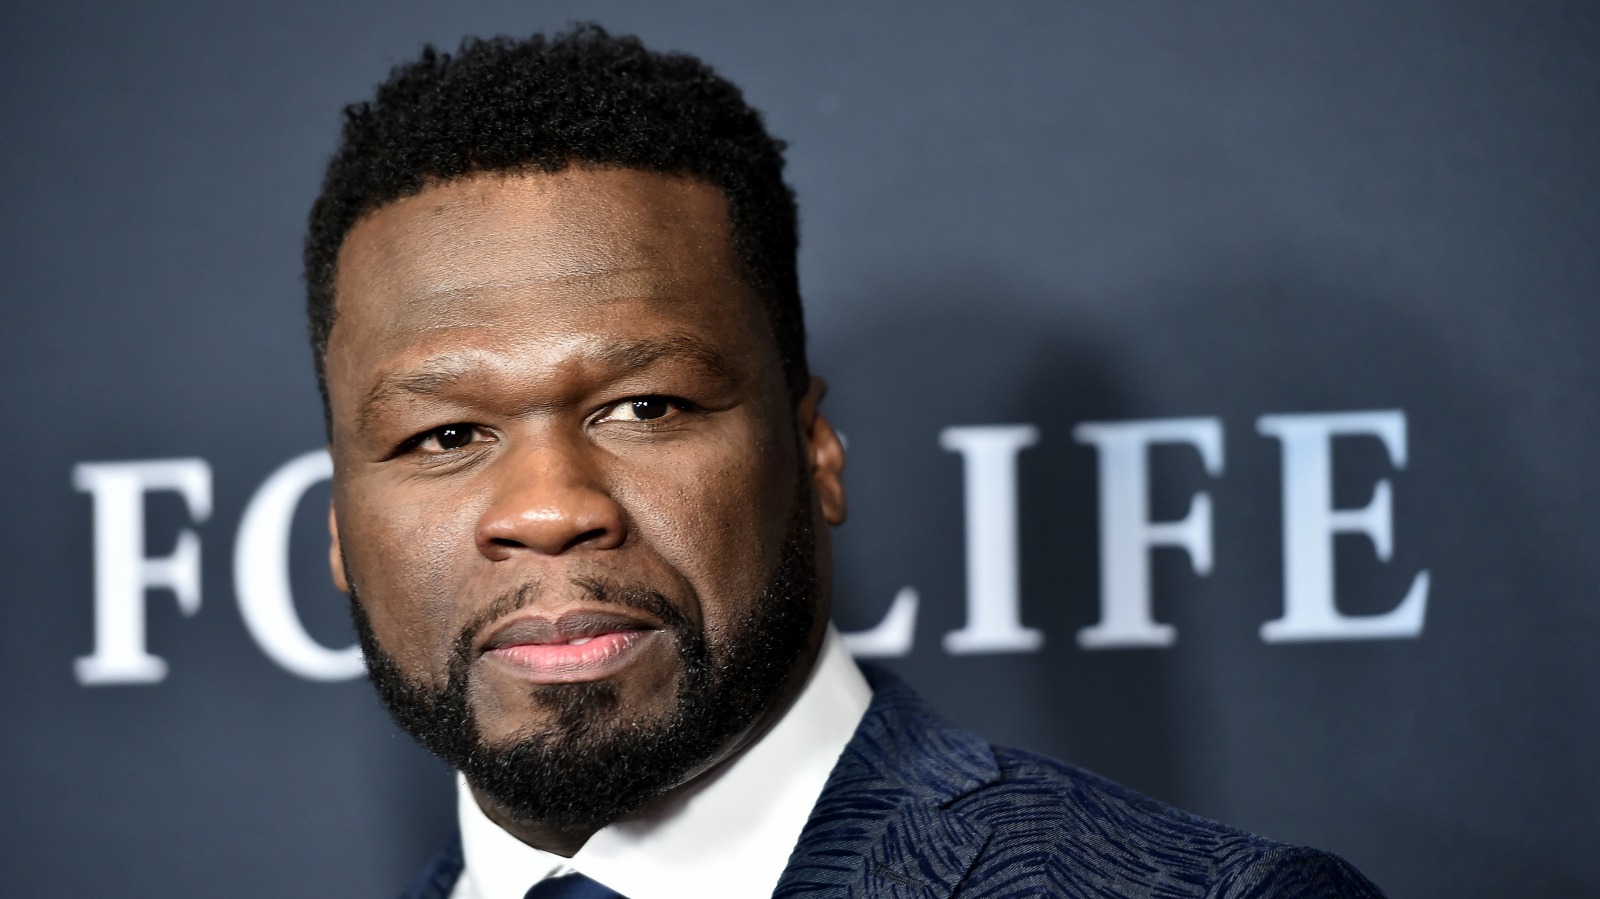 You Wouldn't Want To Meet 50-Cent In Real Life. Here's Why